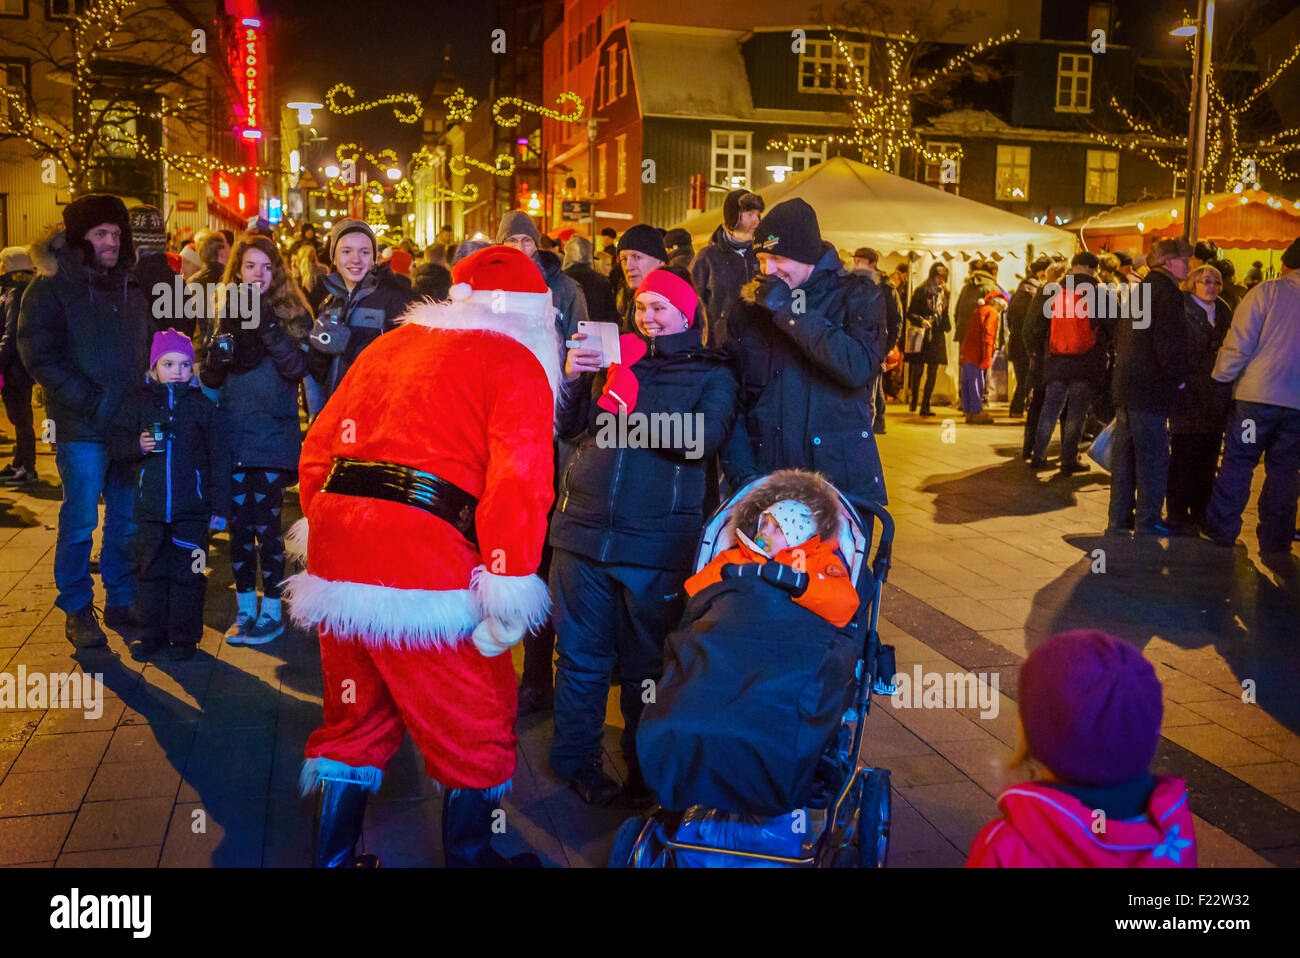 Taking pictures of Santa Claus at a Christmas Market, Reykjavik, Iceland Stock Photo